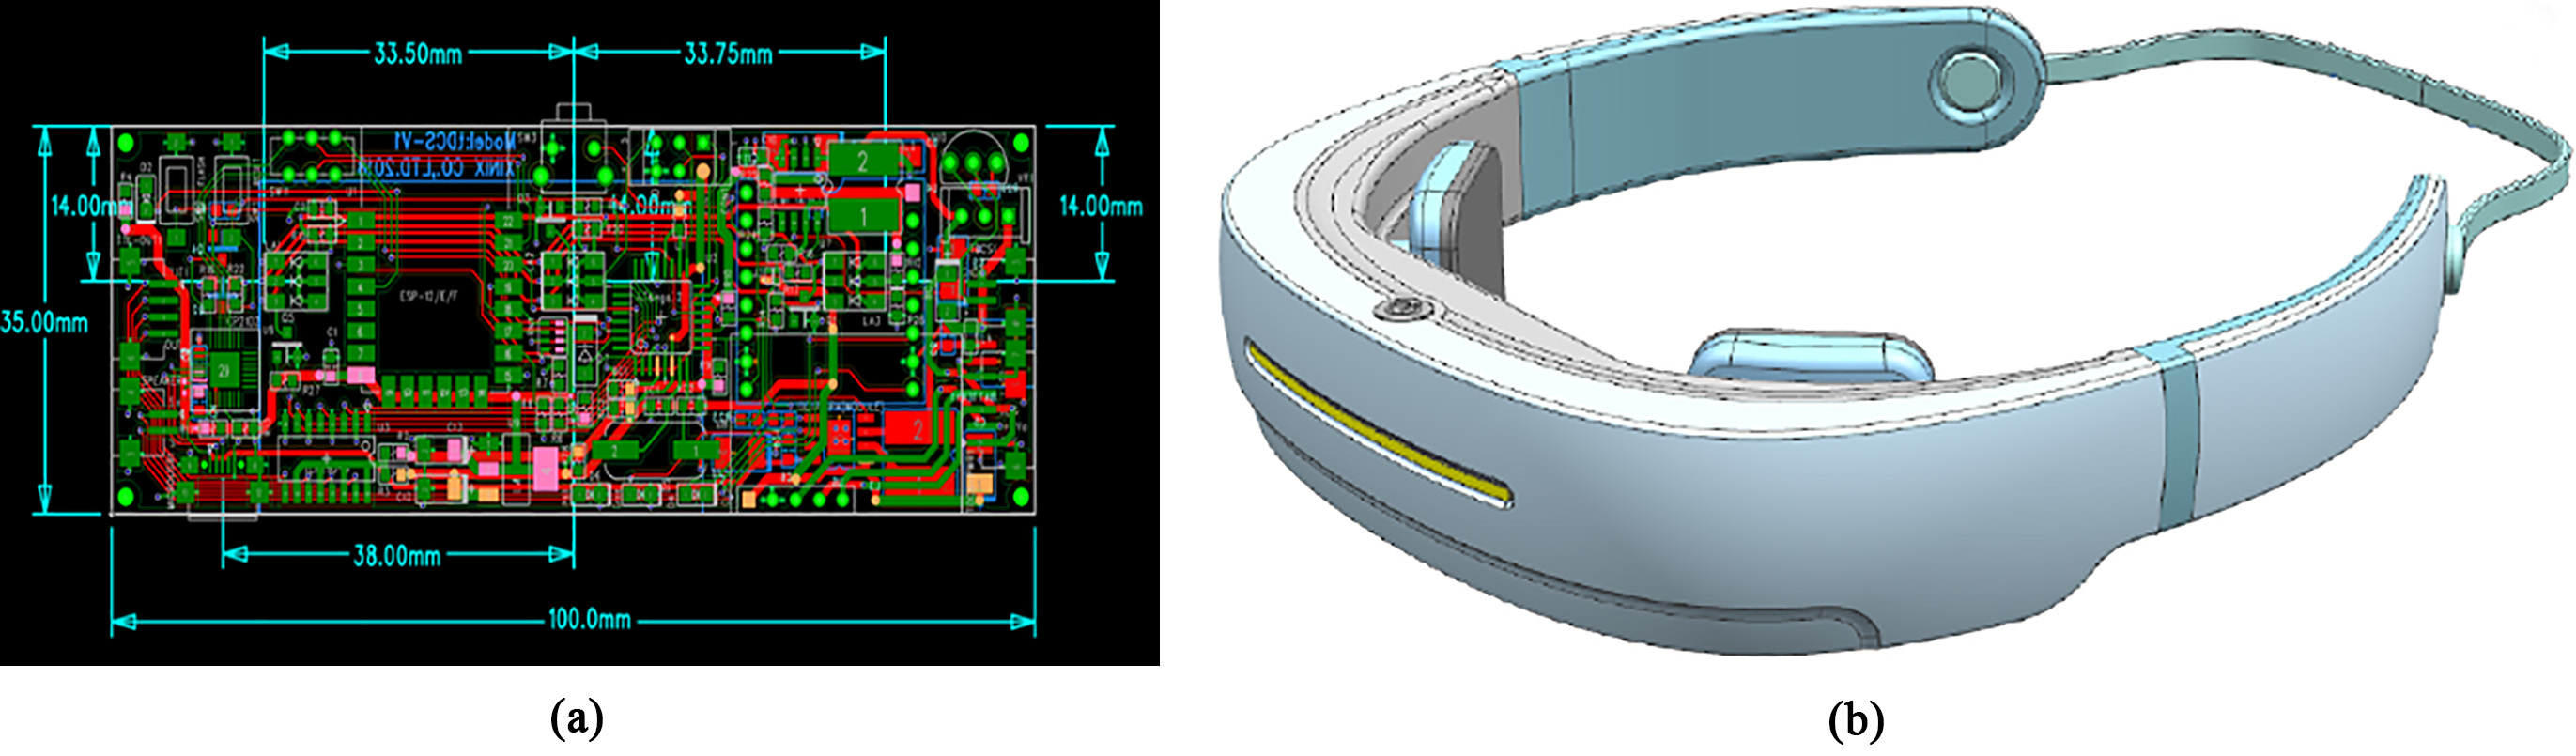 Proposed tDCS device: (a) layout of the main control PCB, and (b) design of the device.